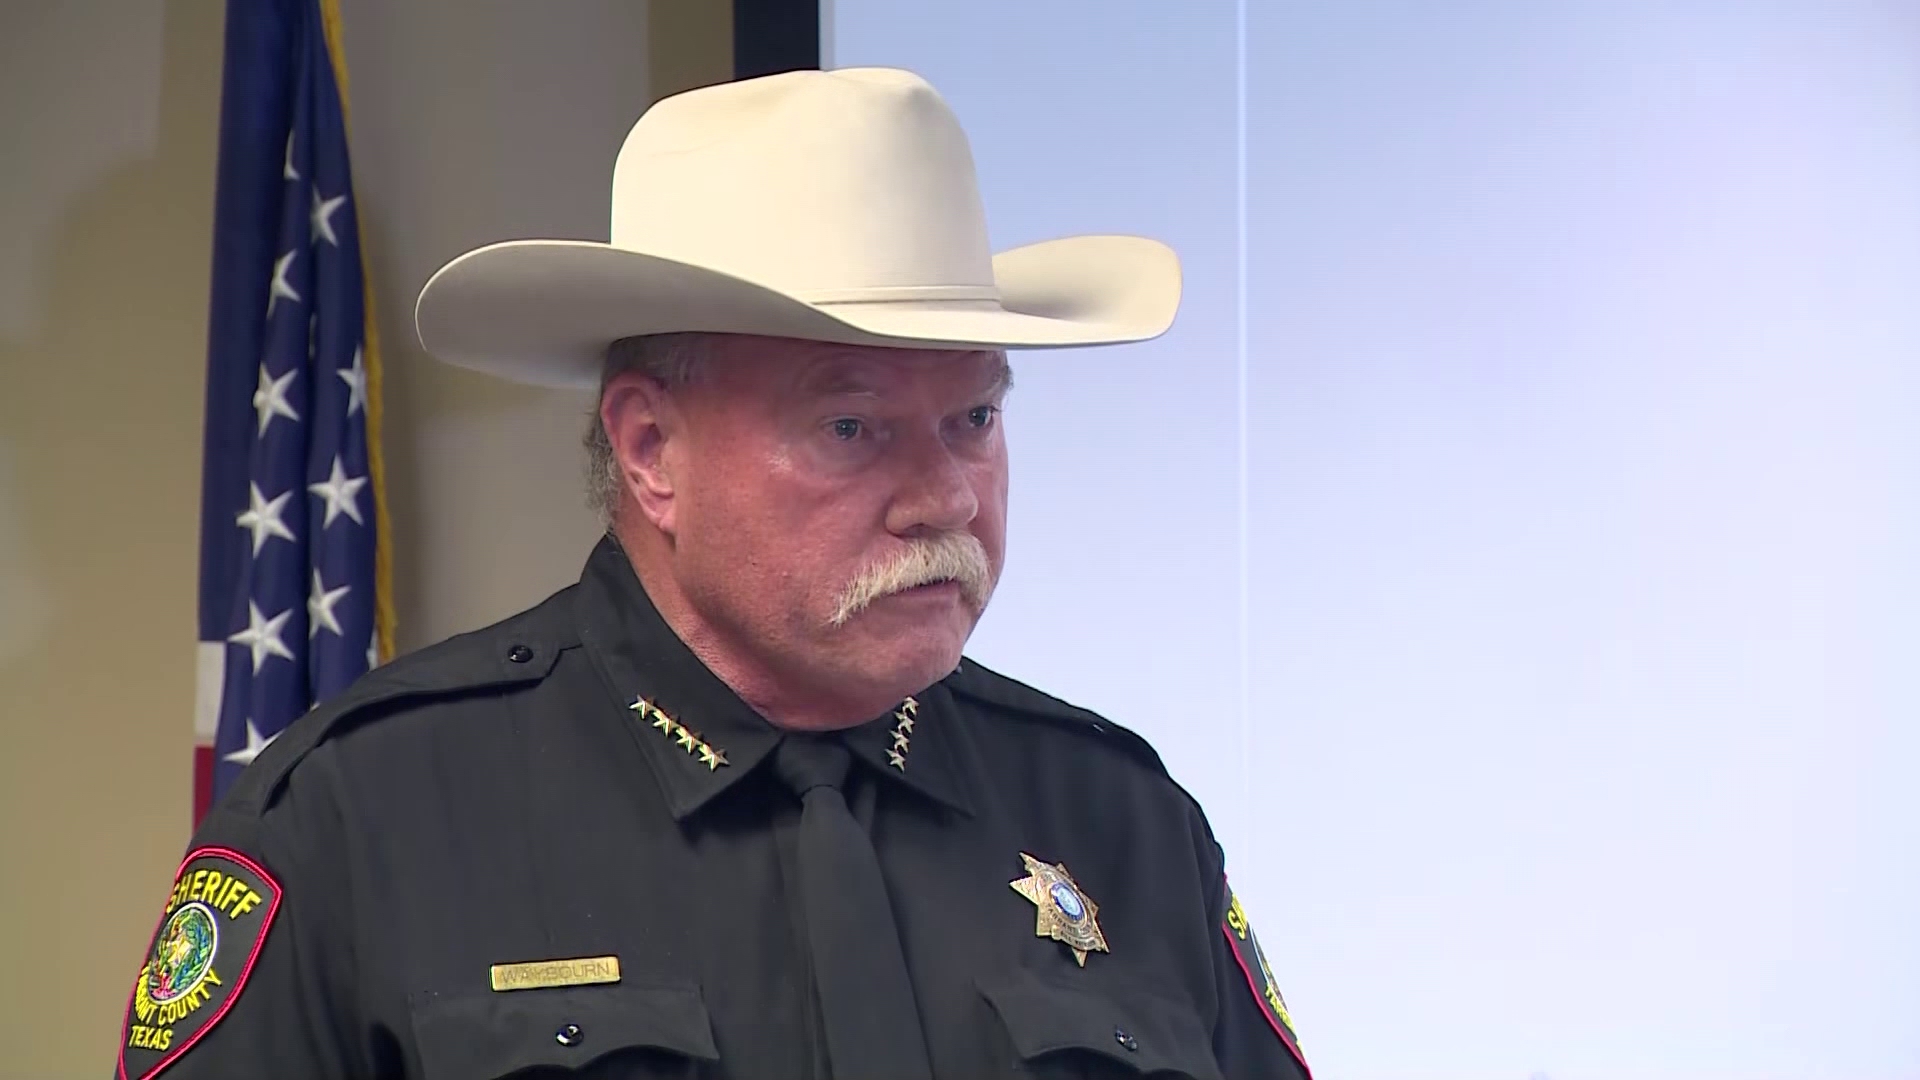 Tarrant County Sheriff Bill Waybourn addresses the in-custody April death of inmate Anthony Johnson at Tarrant County Jail during a May 16 press conference.